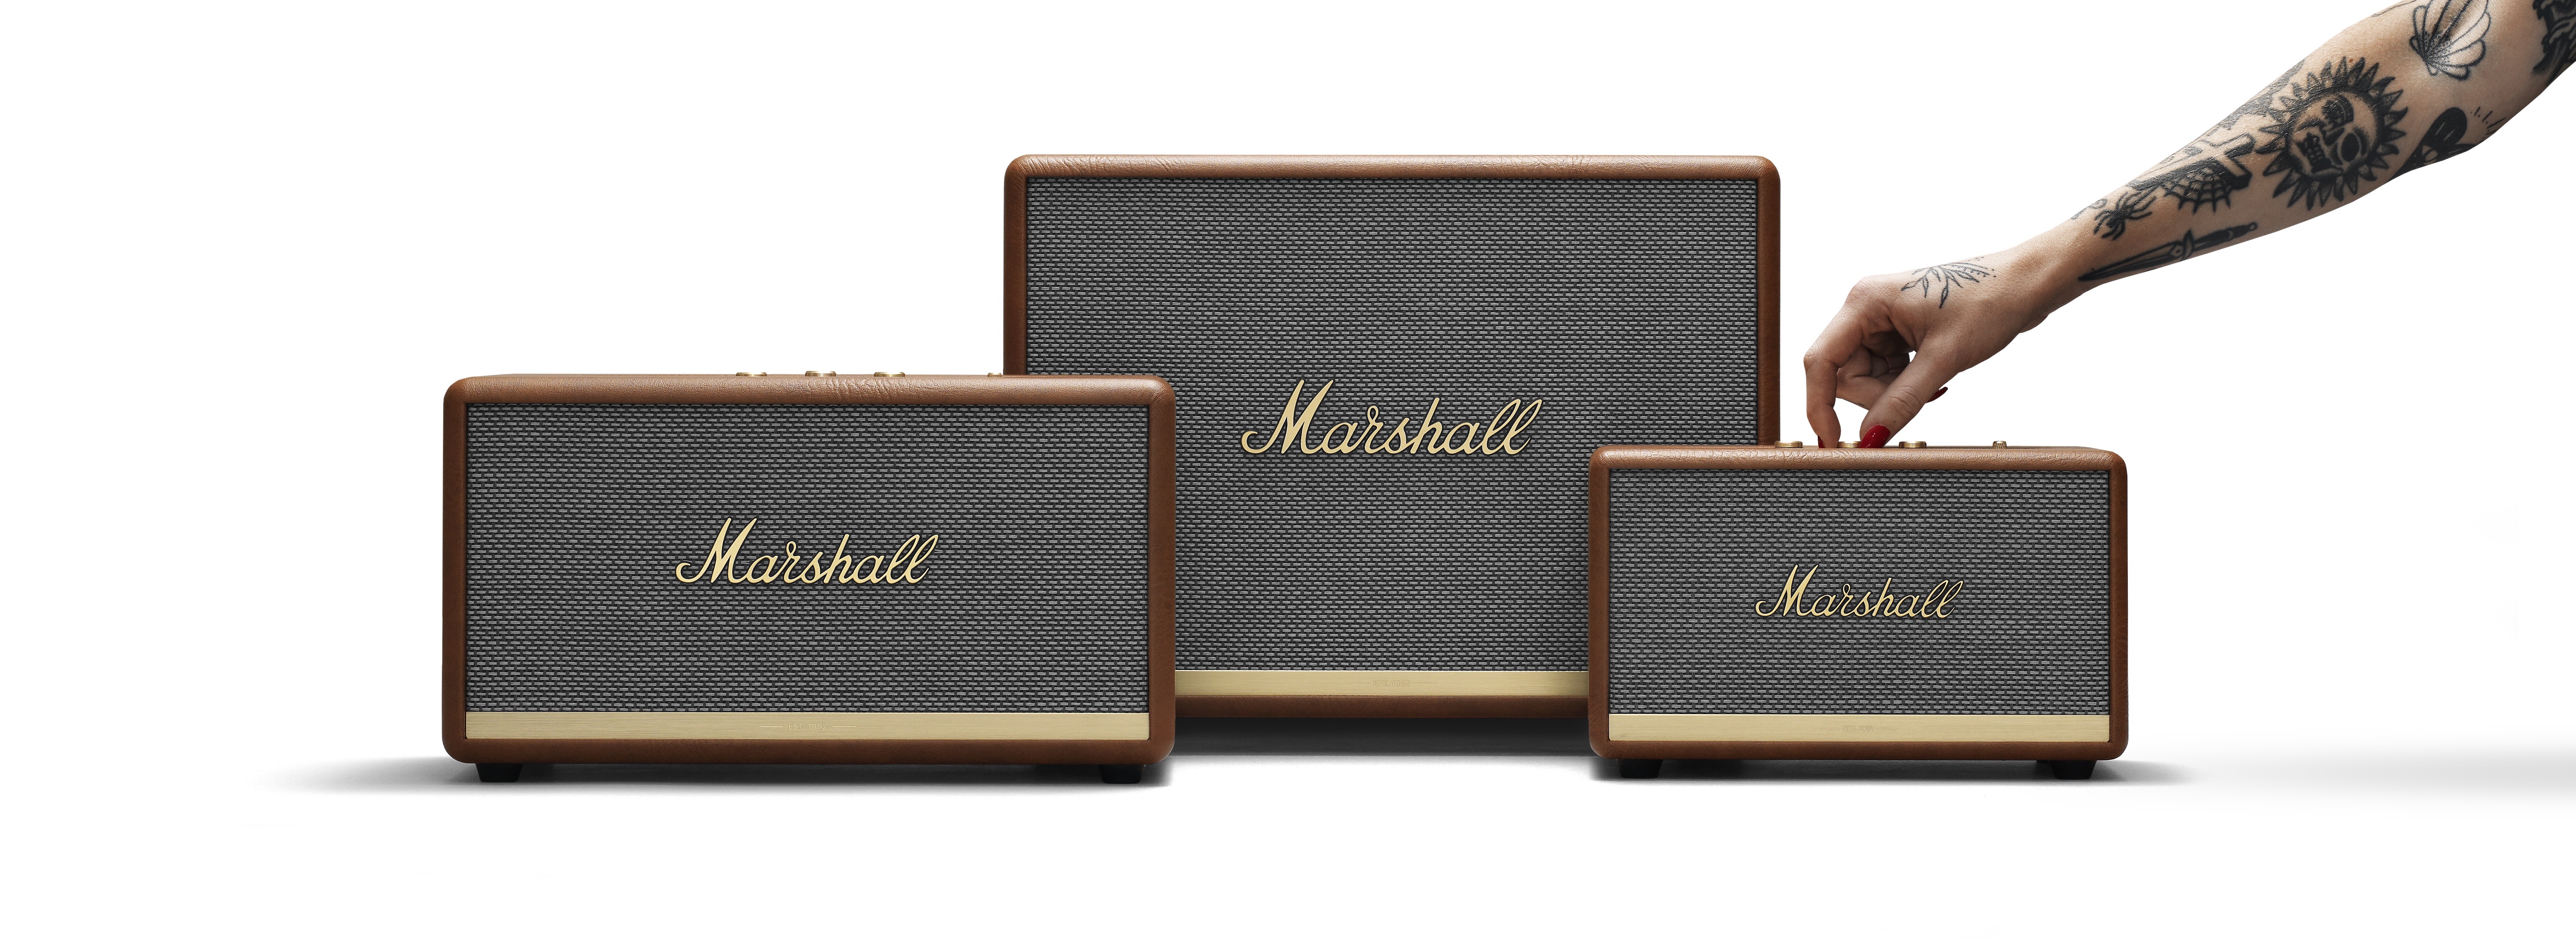 Marshall Bluetooth speakers get new colorway